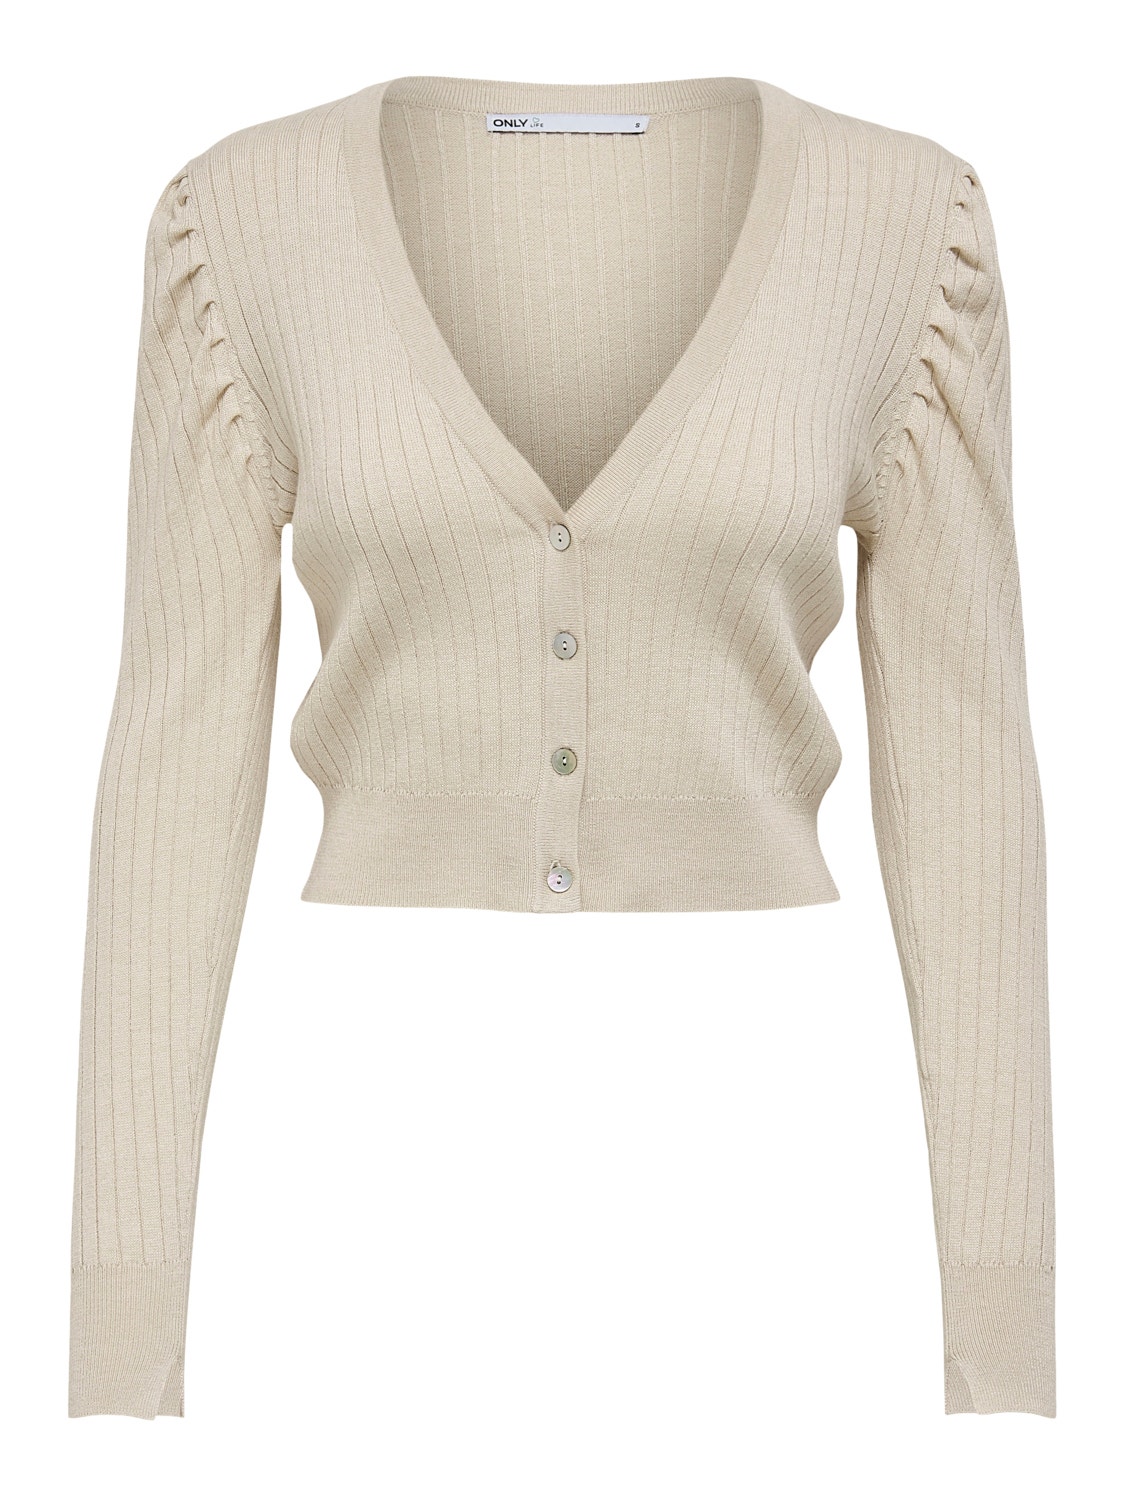 ONLY Short Knitted Cardigan -Pumice Stone - 15233013